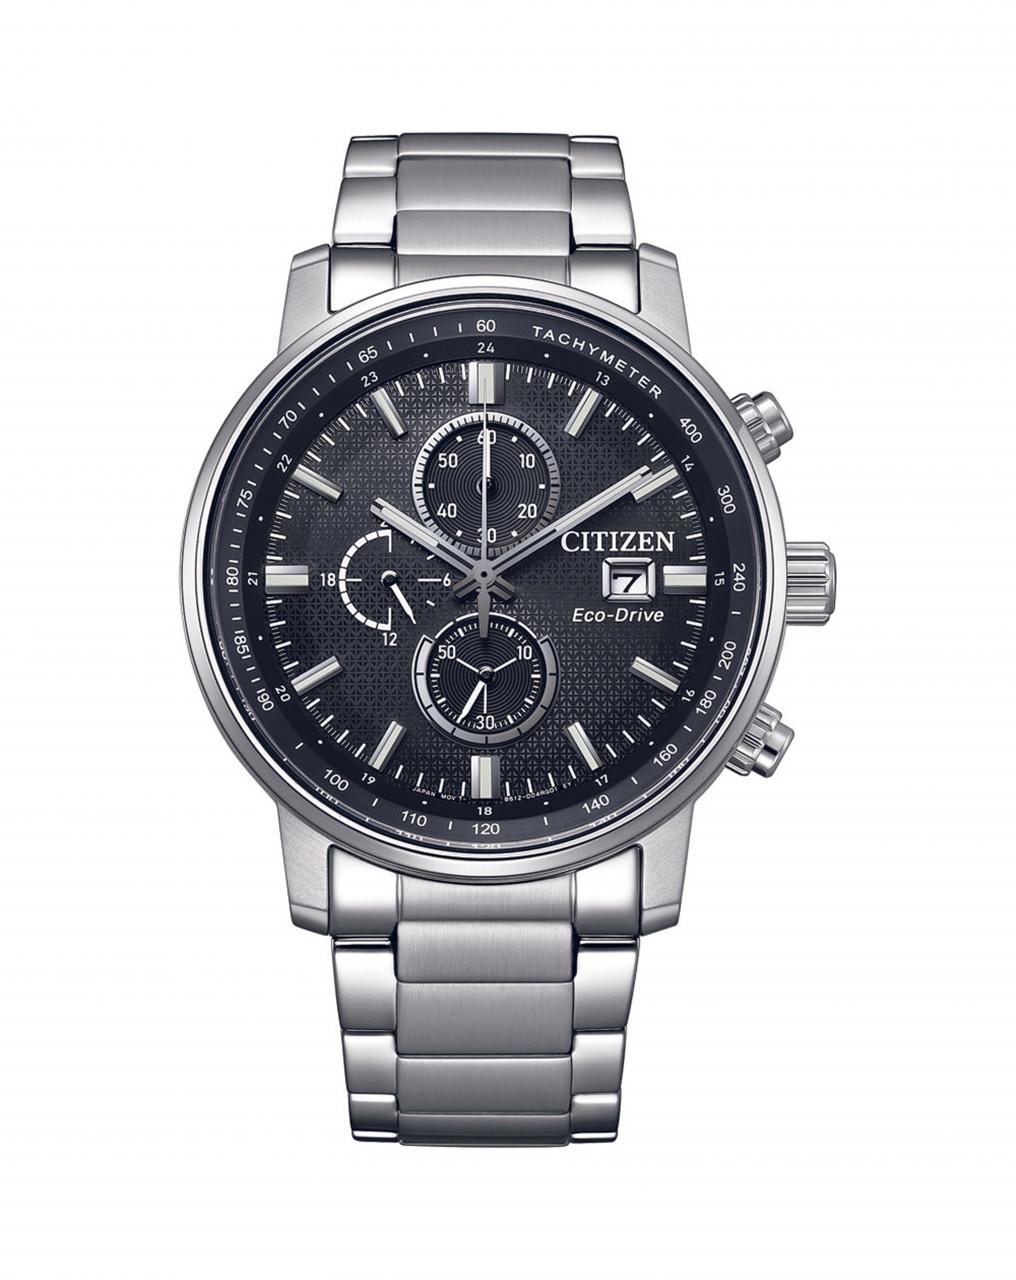 Citizen Gents Eco-Drive Stainless Steel Black Dial Watch 200M WR Watch Code: CA0840-87E